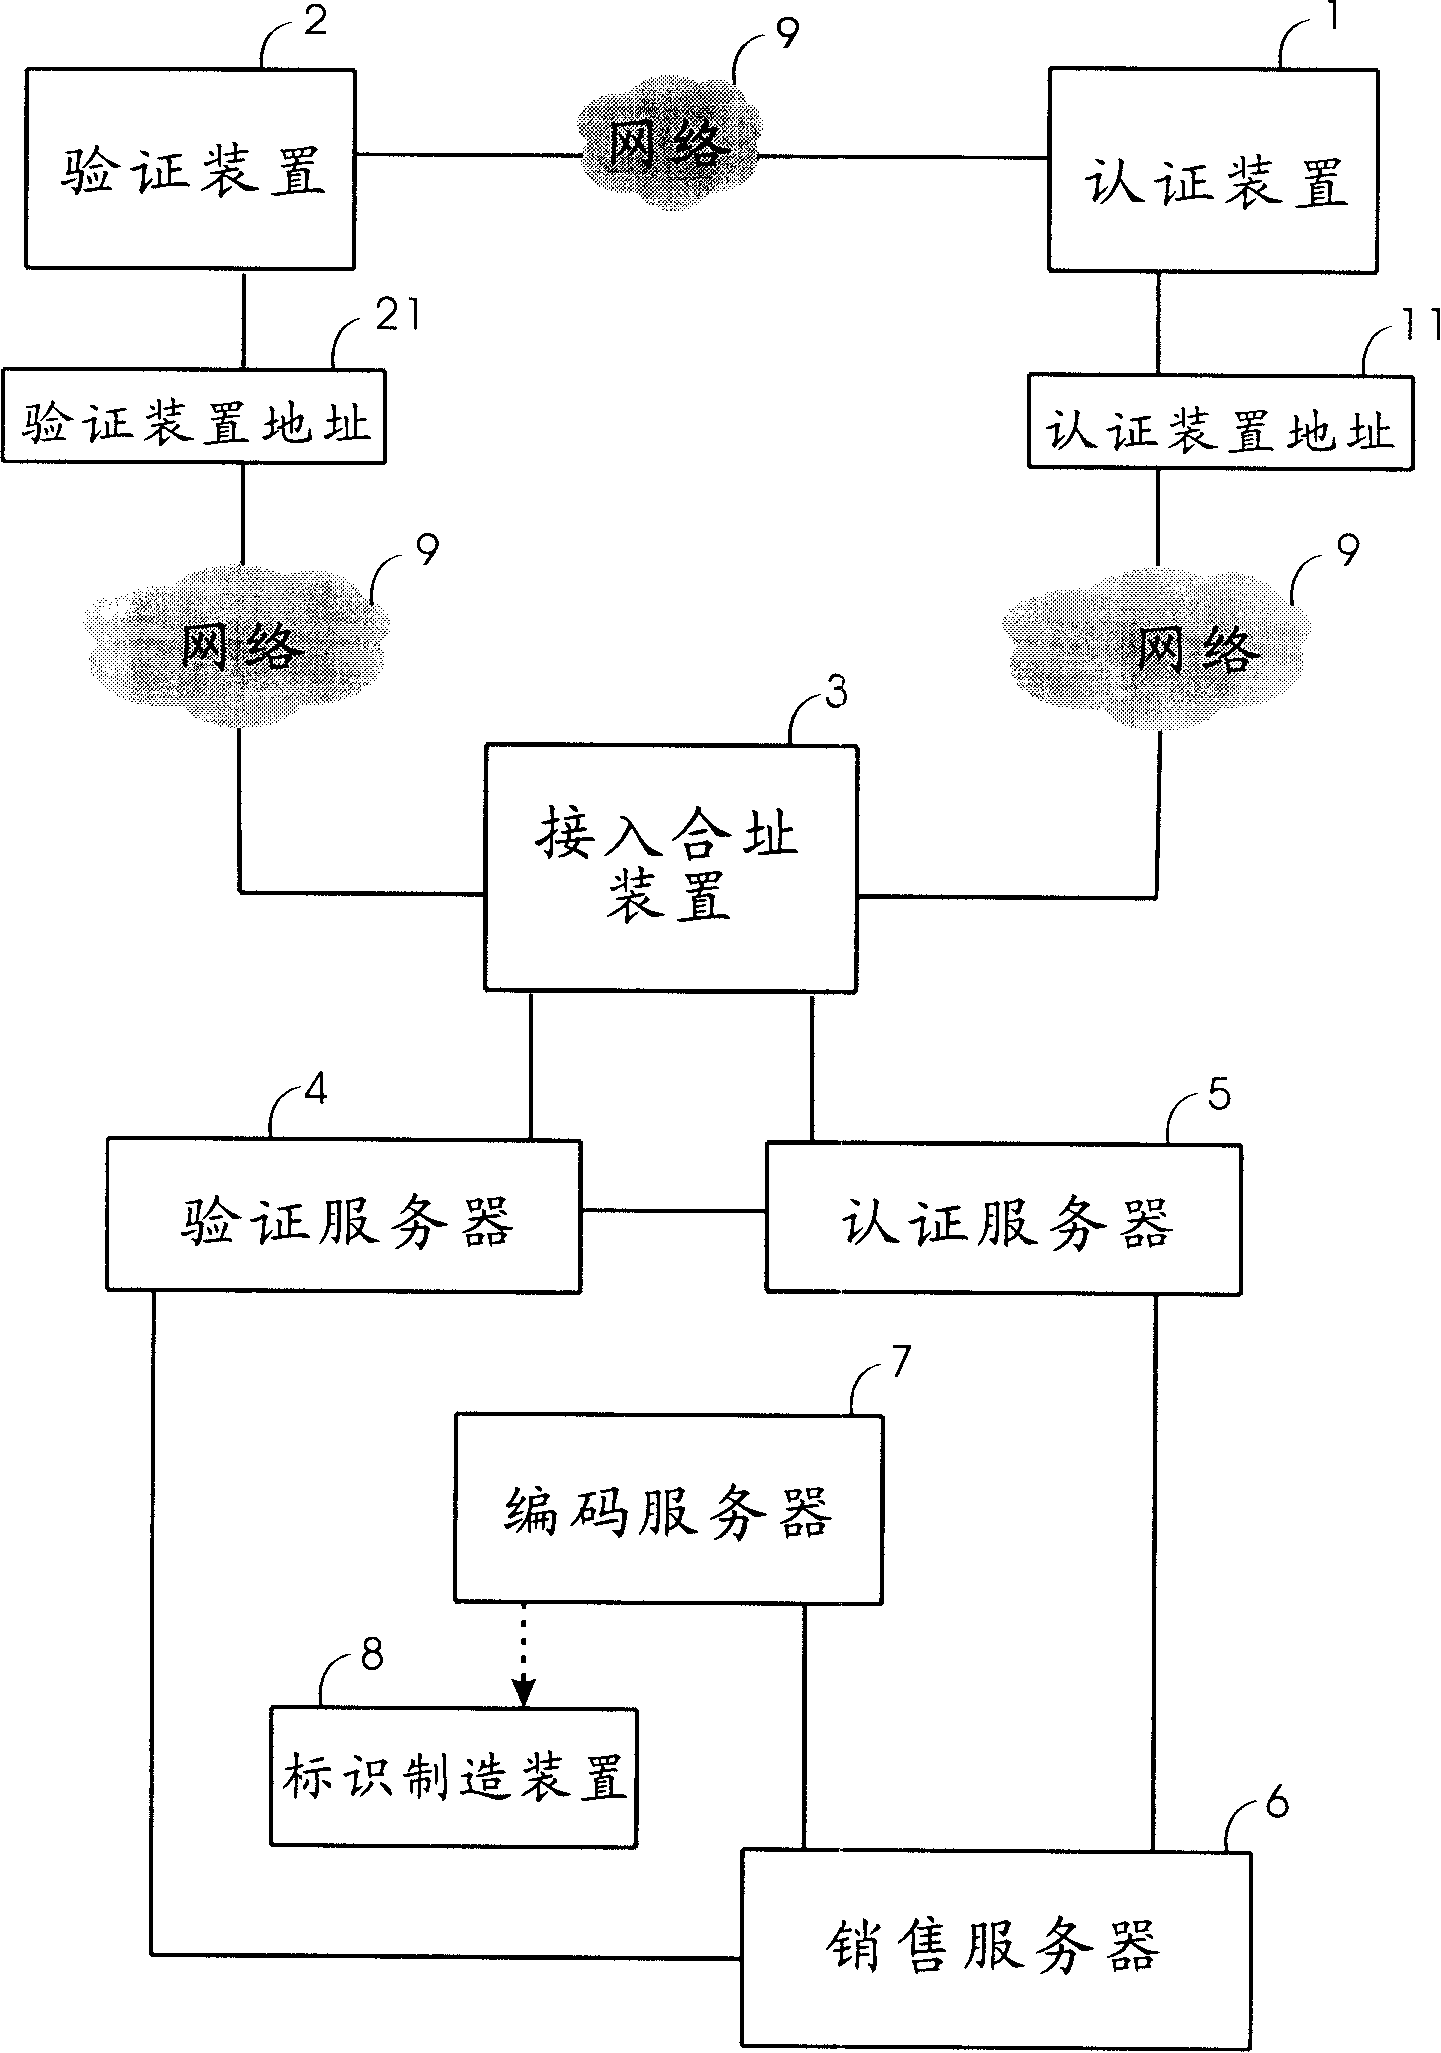 Combined address identification system and method, and automatic identification device